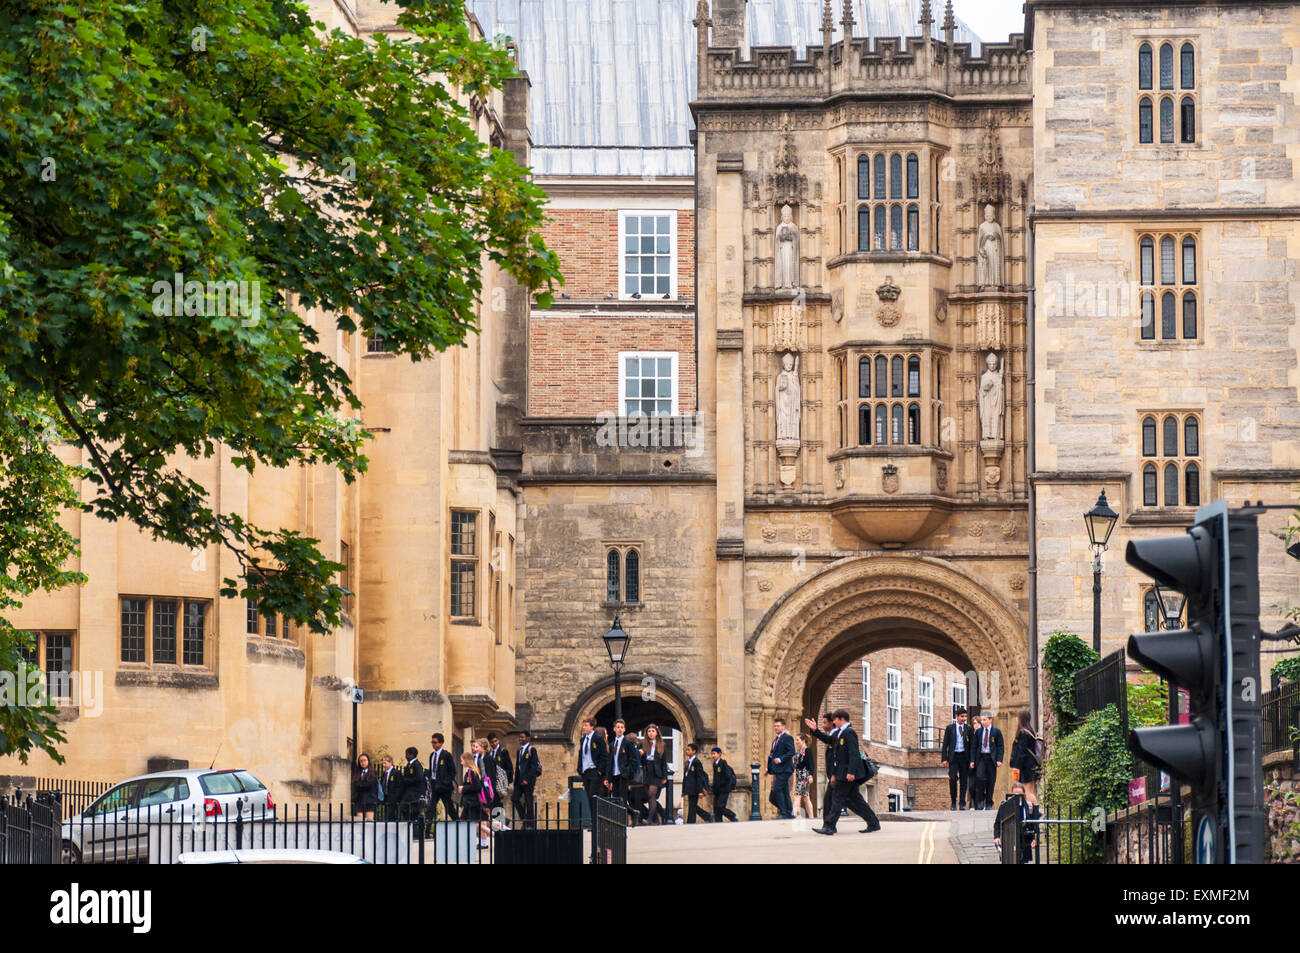 bristol-cathedral-choir-school-abbey-house-college-square-bristol-england-uk-stock-photo